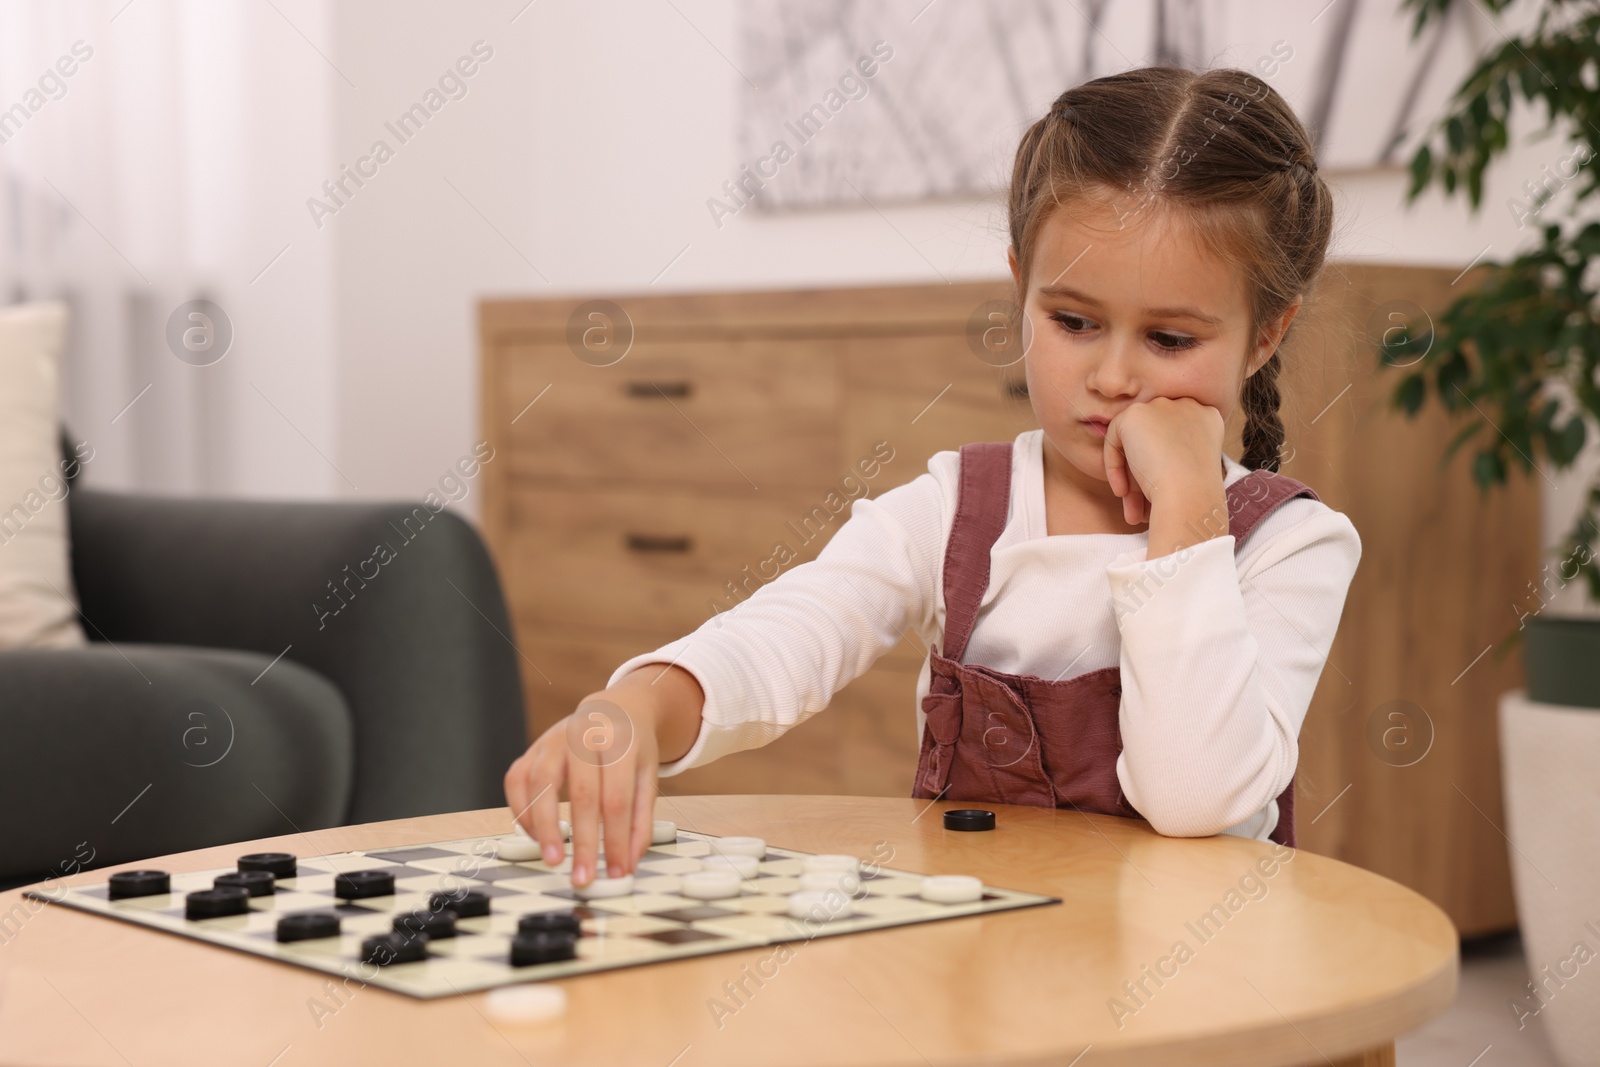 Photo of Thoughtful girl playing checkers at wooden table in room